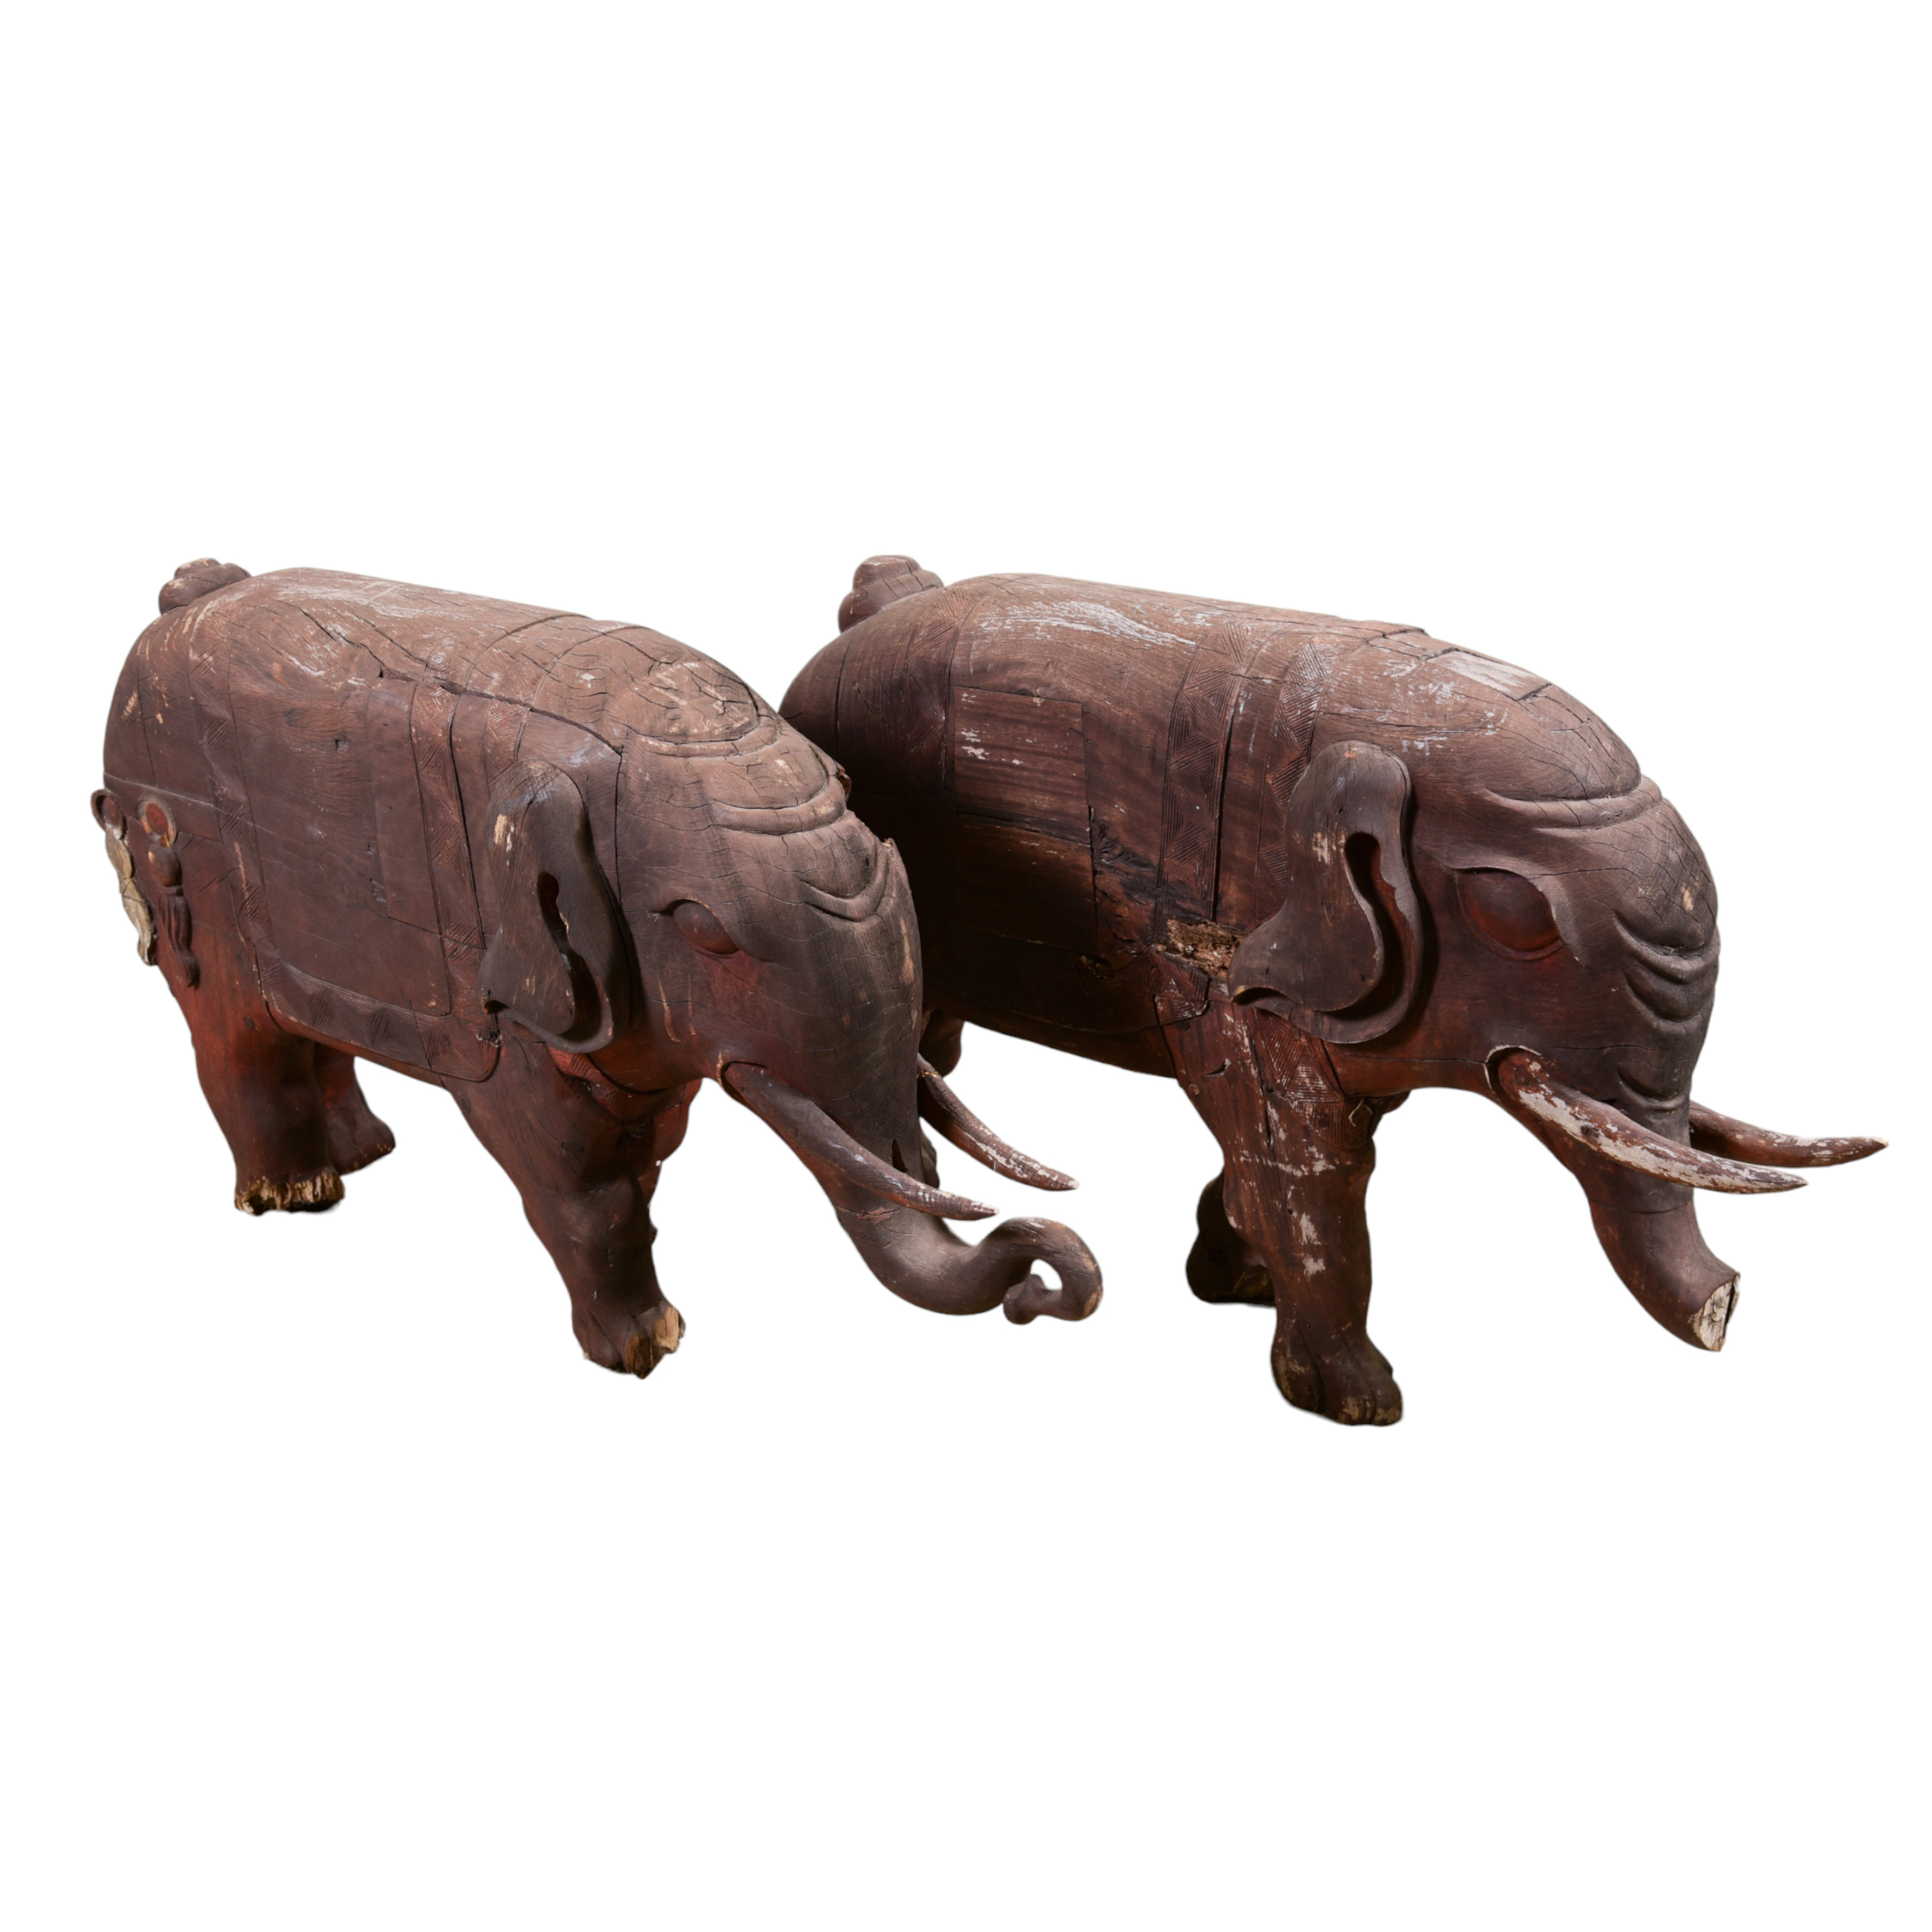 Pair carved wood elephants according 3ca3d4